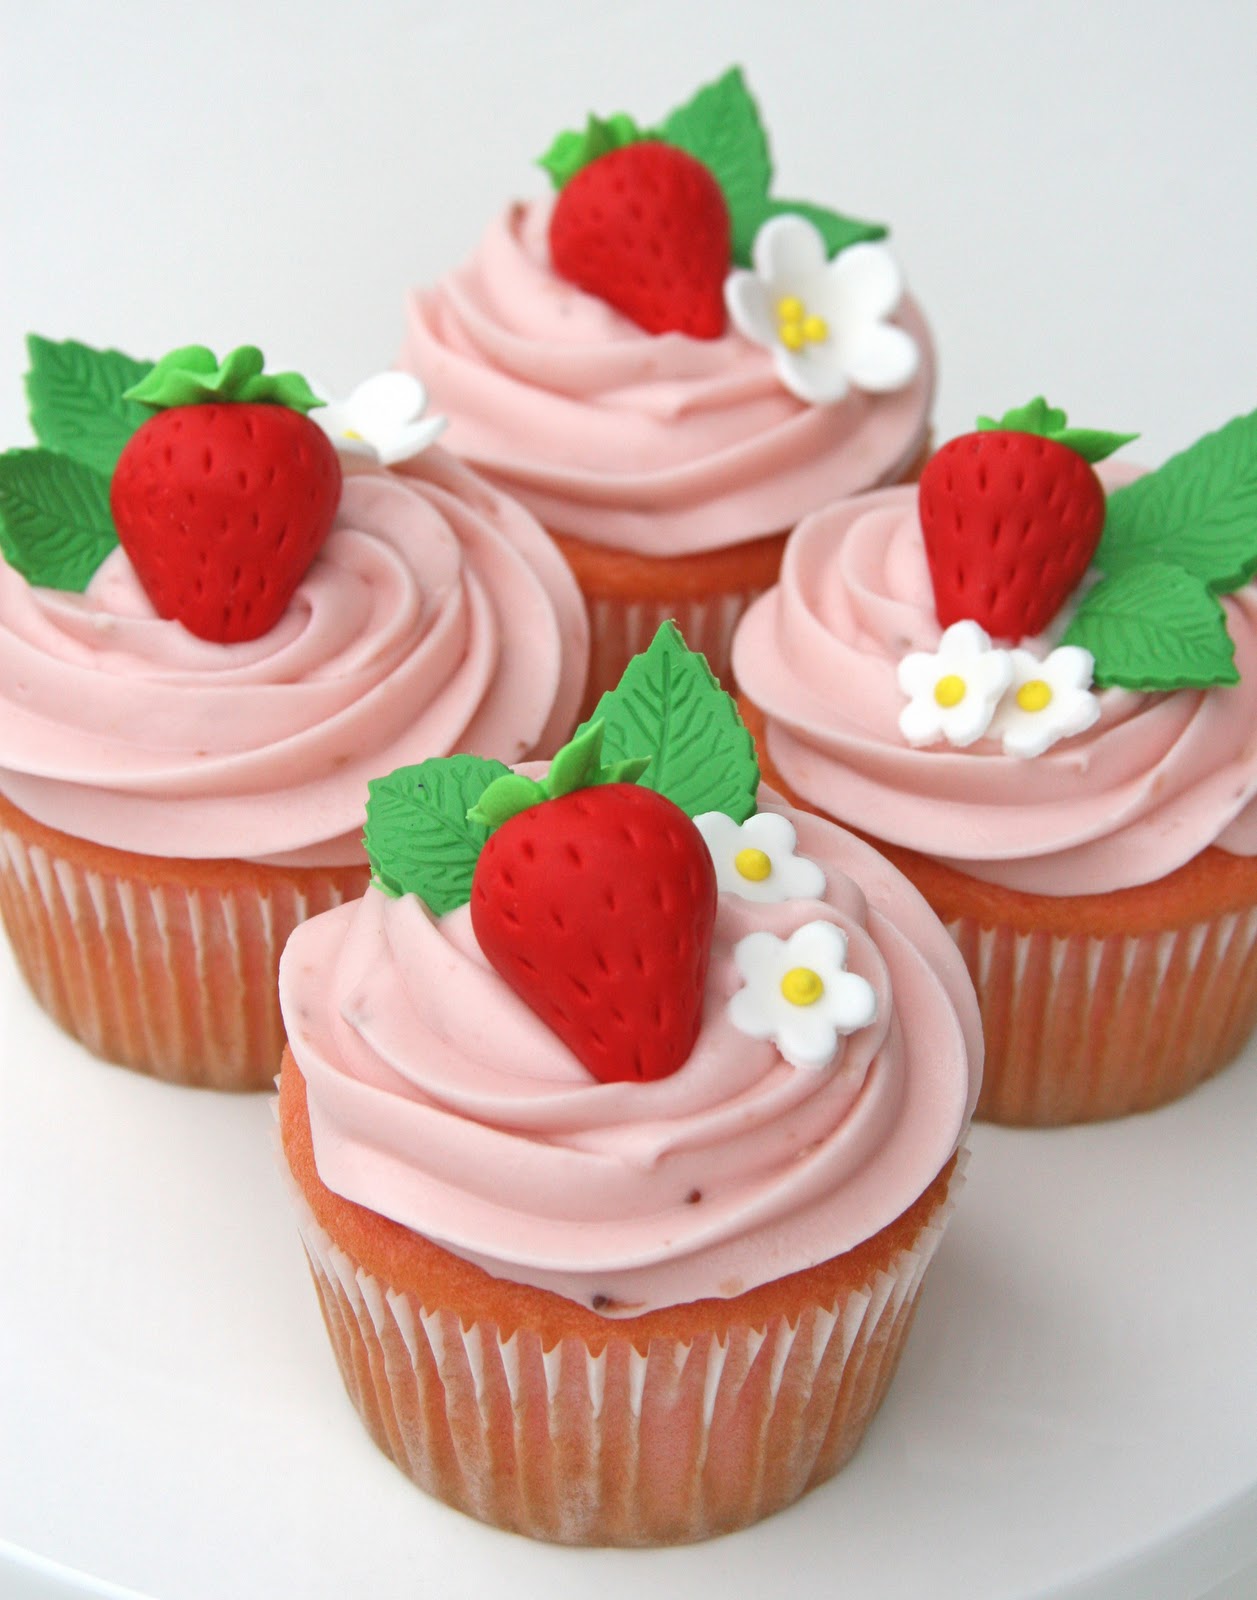 Strawberry Cupcakes With Real Strawberries